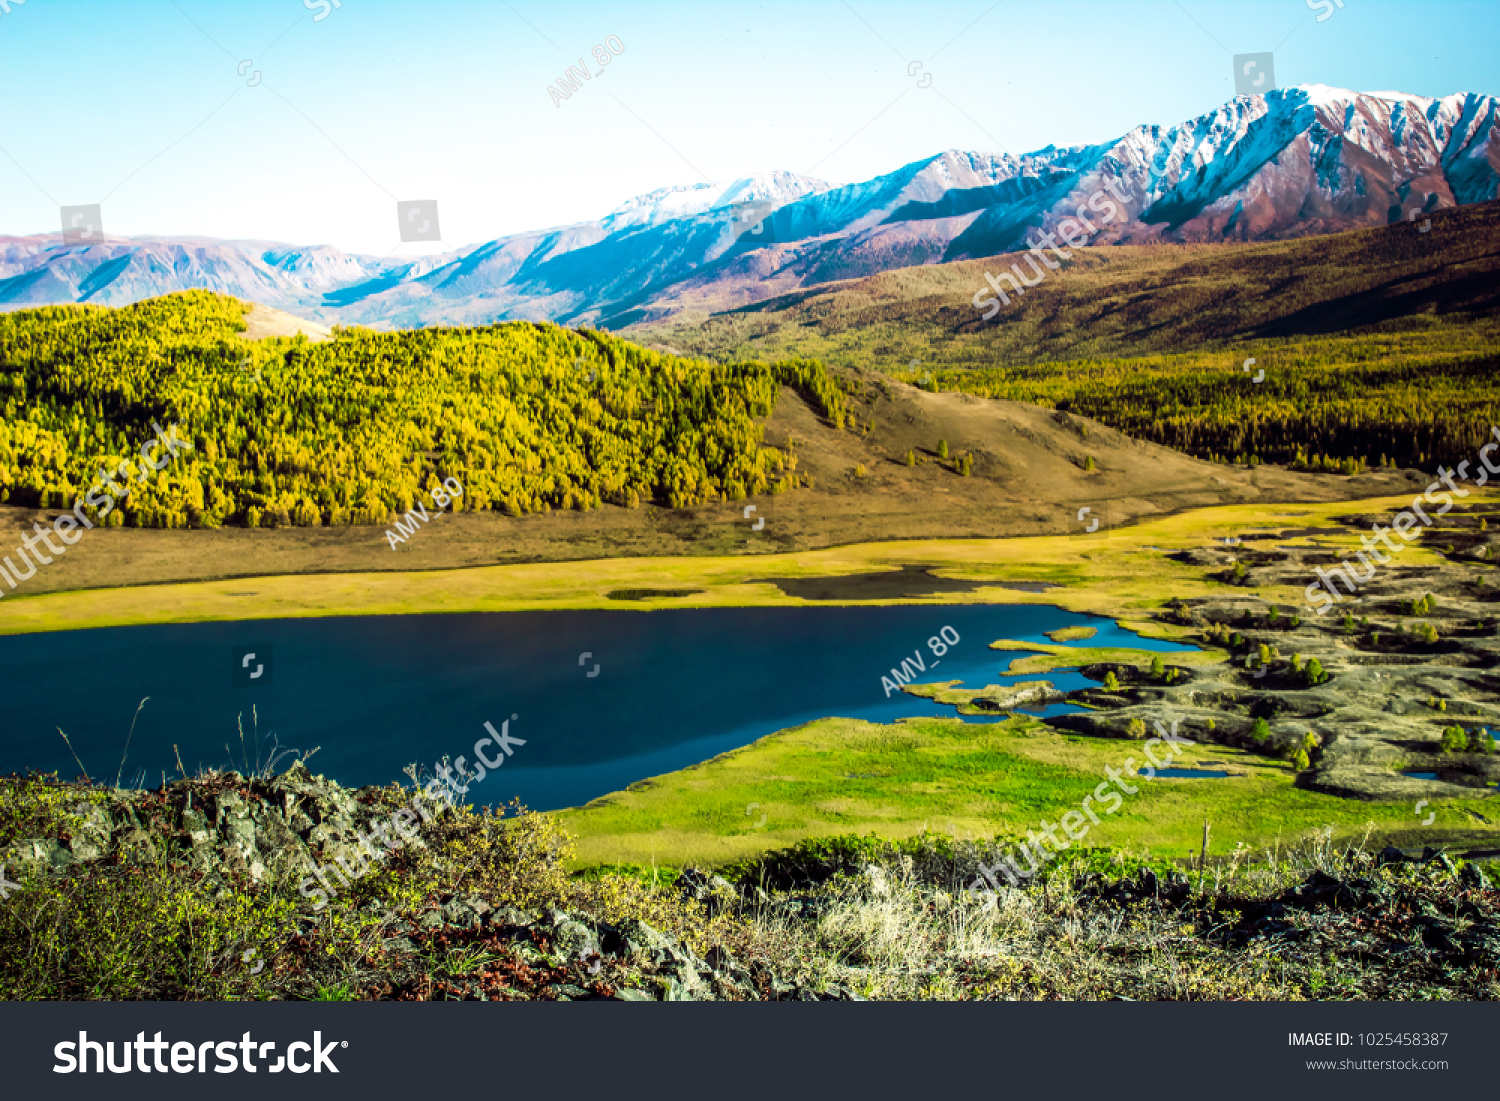 View of the Sunny mountain valley with lakes and rivers. Journey through the Altai Republic. #1025458387